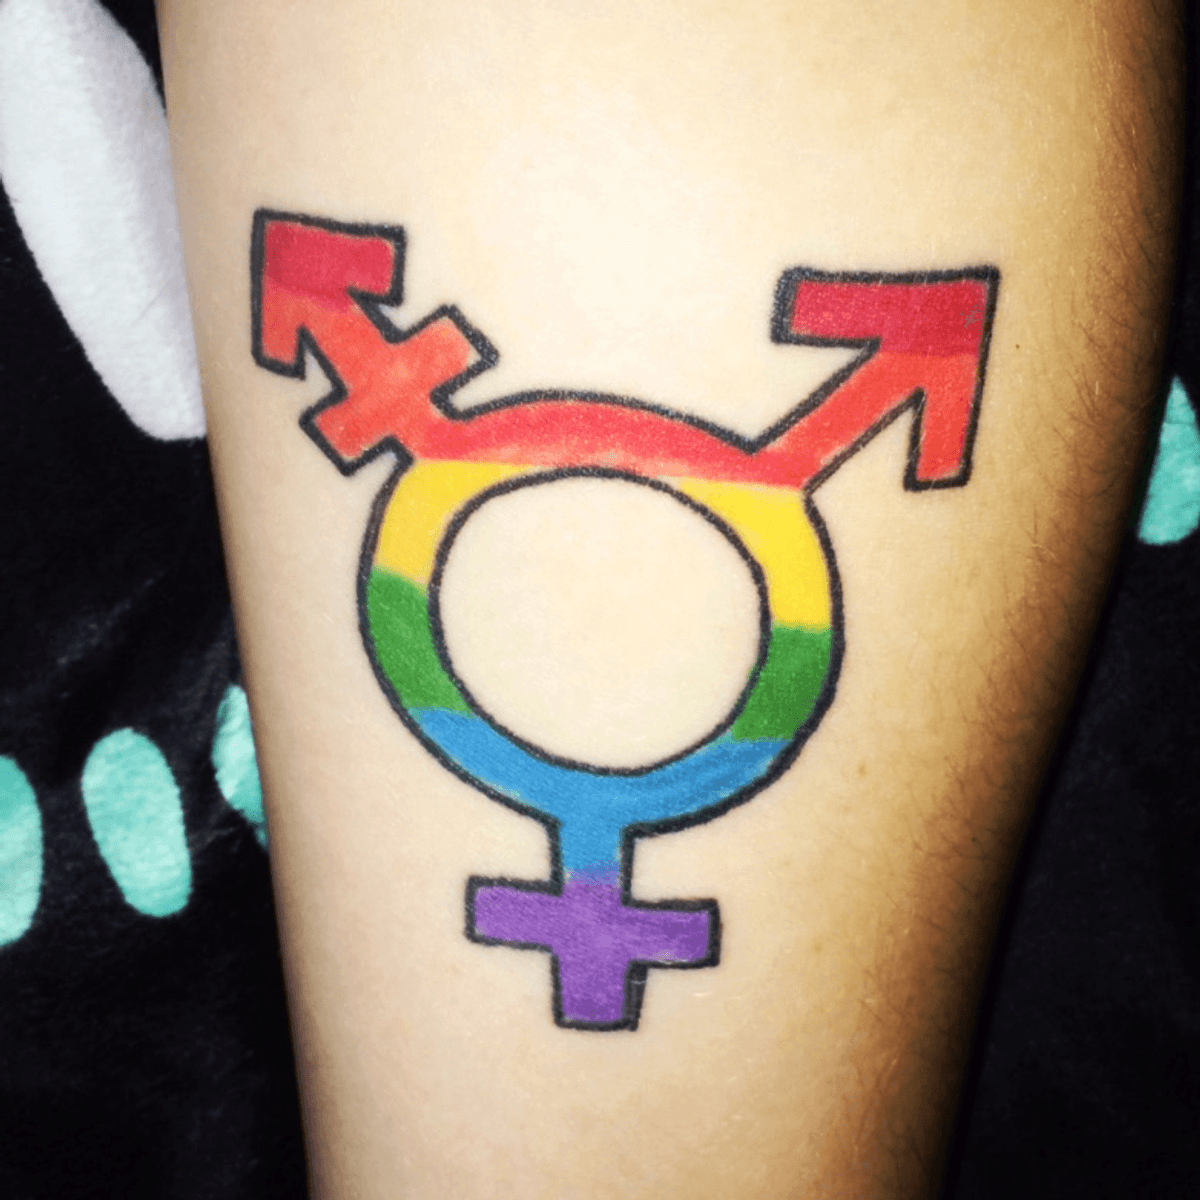 Tattoo Uploaded By Alex Spofford • This Is My Very First Tattoo Its A Transgender Symbol With 2311